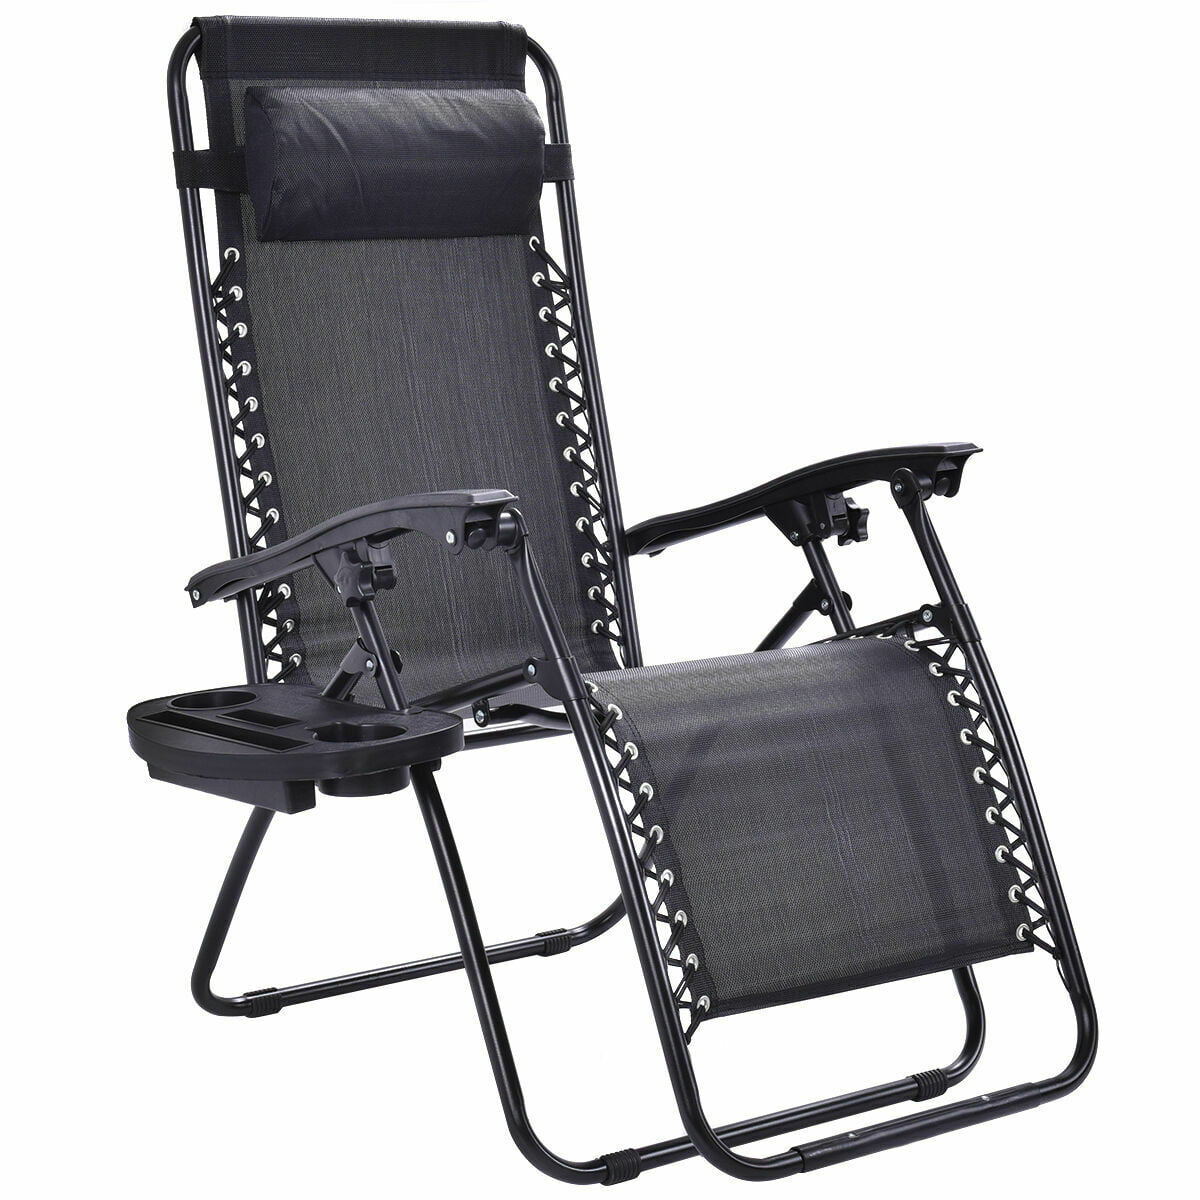 Details about   2 Folding Zero Gravity Reclining Lounge Chairs+Utility Tray Outdoor Beach Patio 